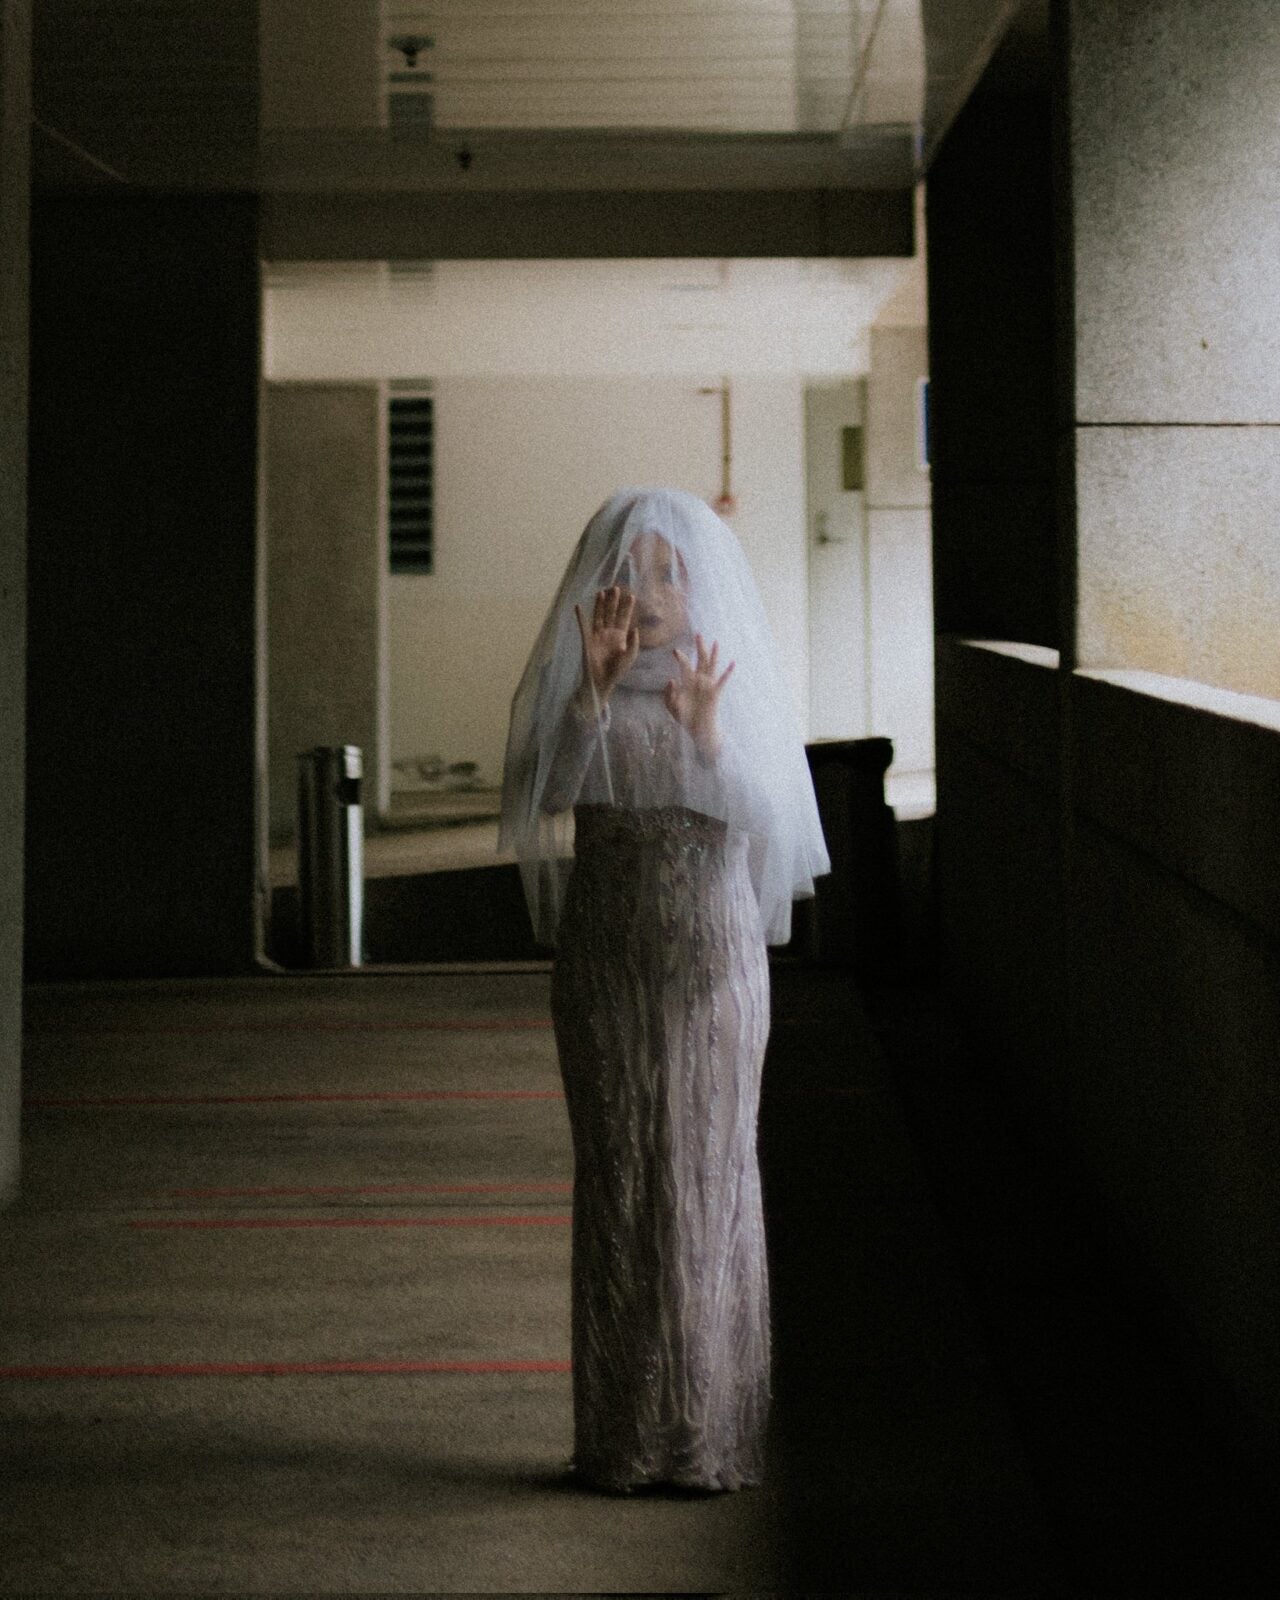 A woman wearing a white dress and hijab covered in a white veil stands creepily in a dark hallway with her hands reaching out in front of her.